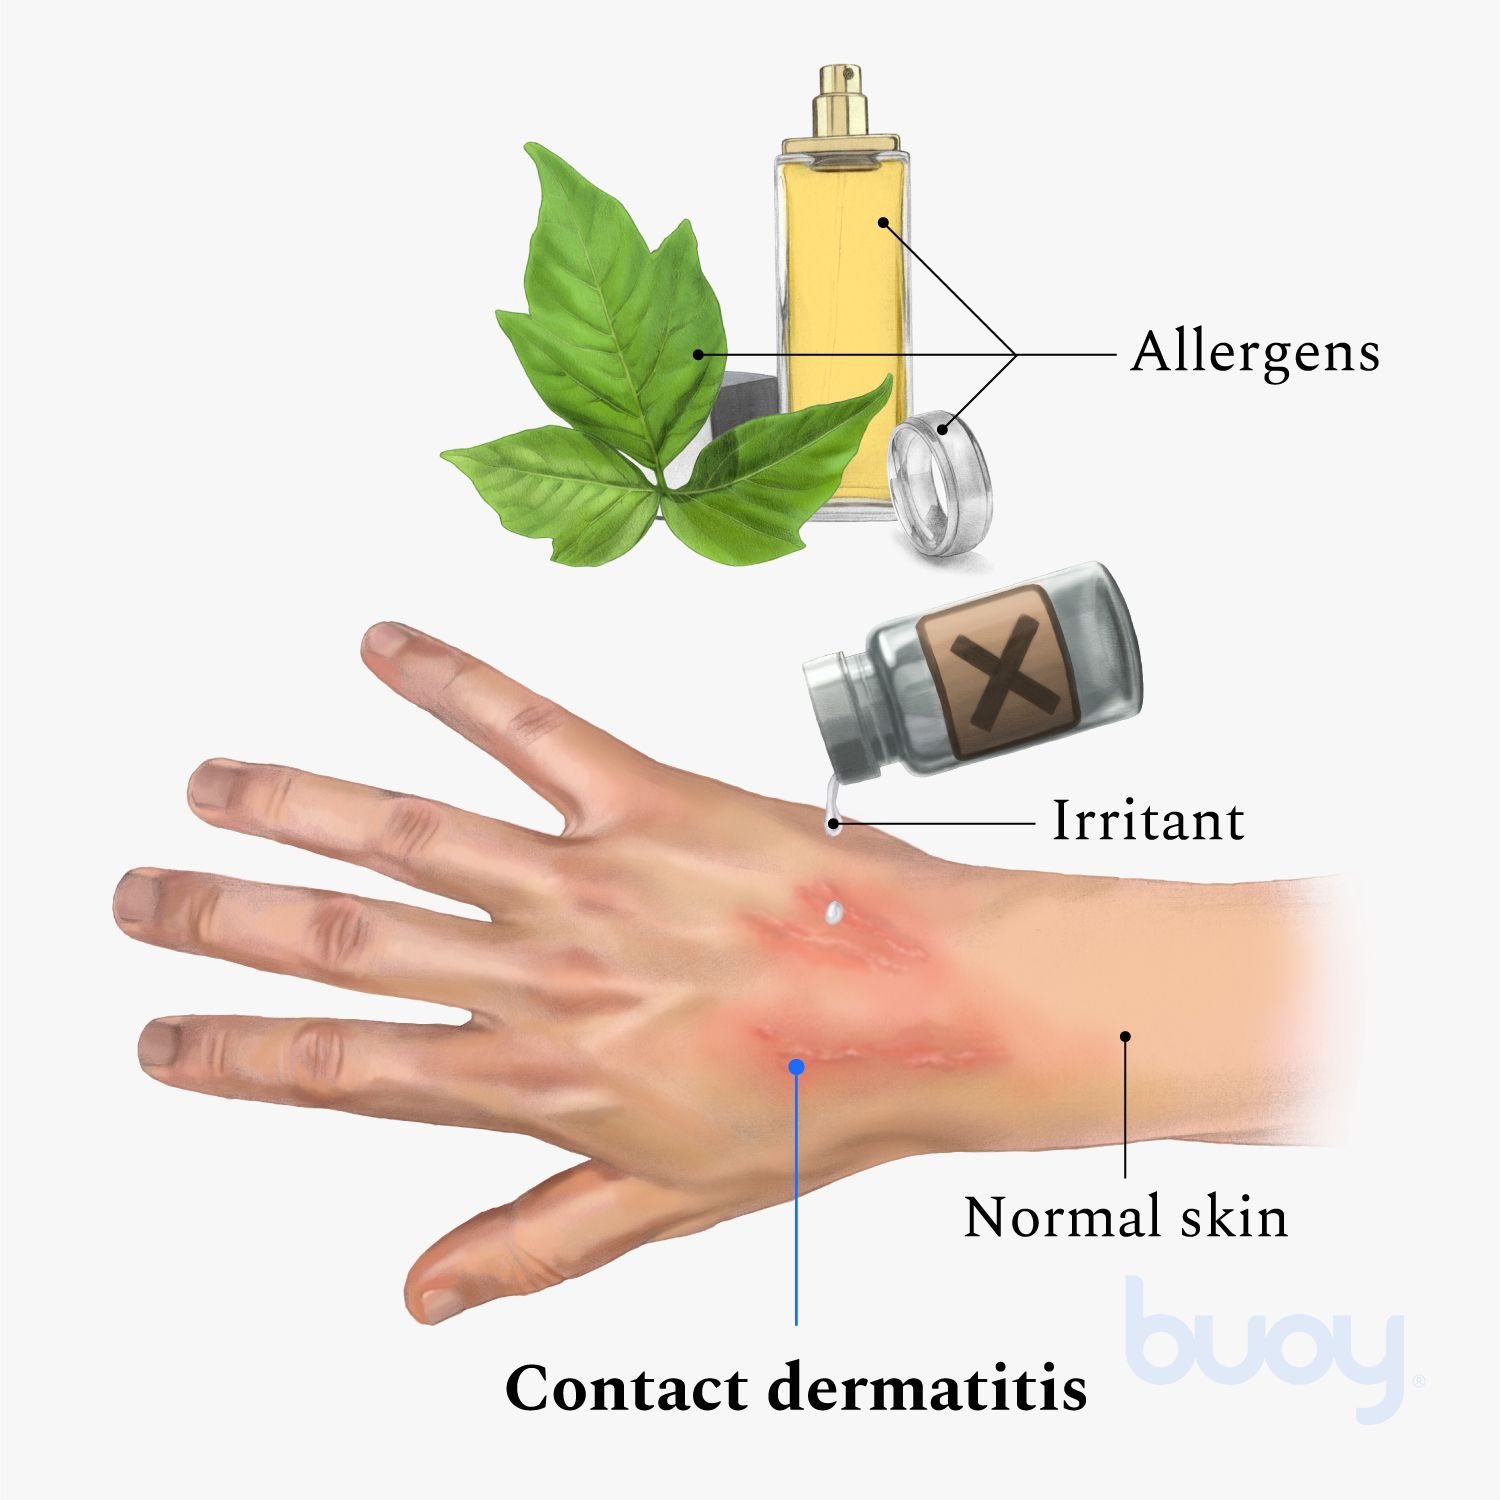 Irritant VS. Allergic Contact Dermatitis: What's the Difference